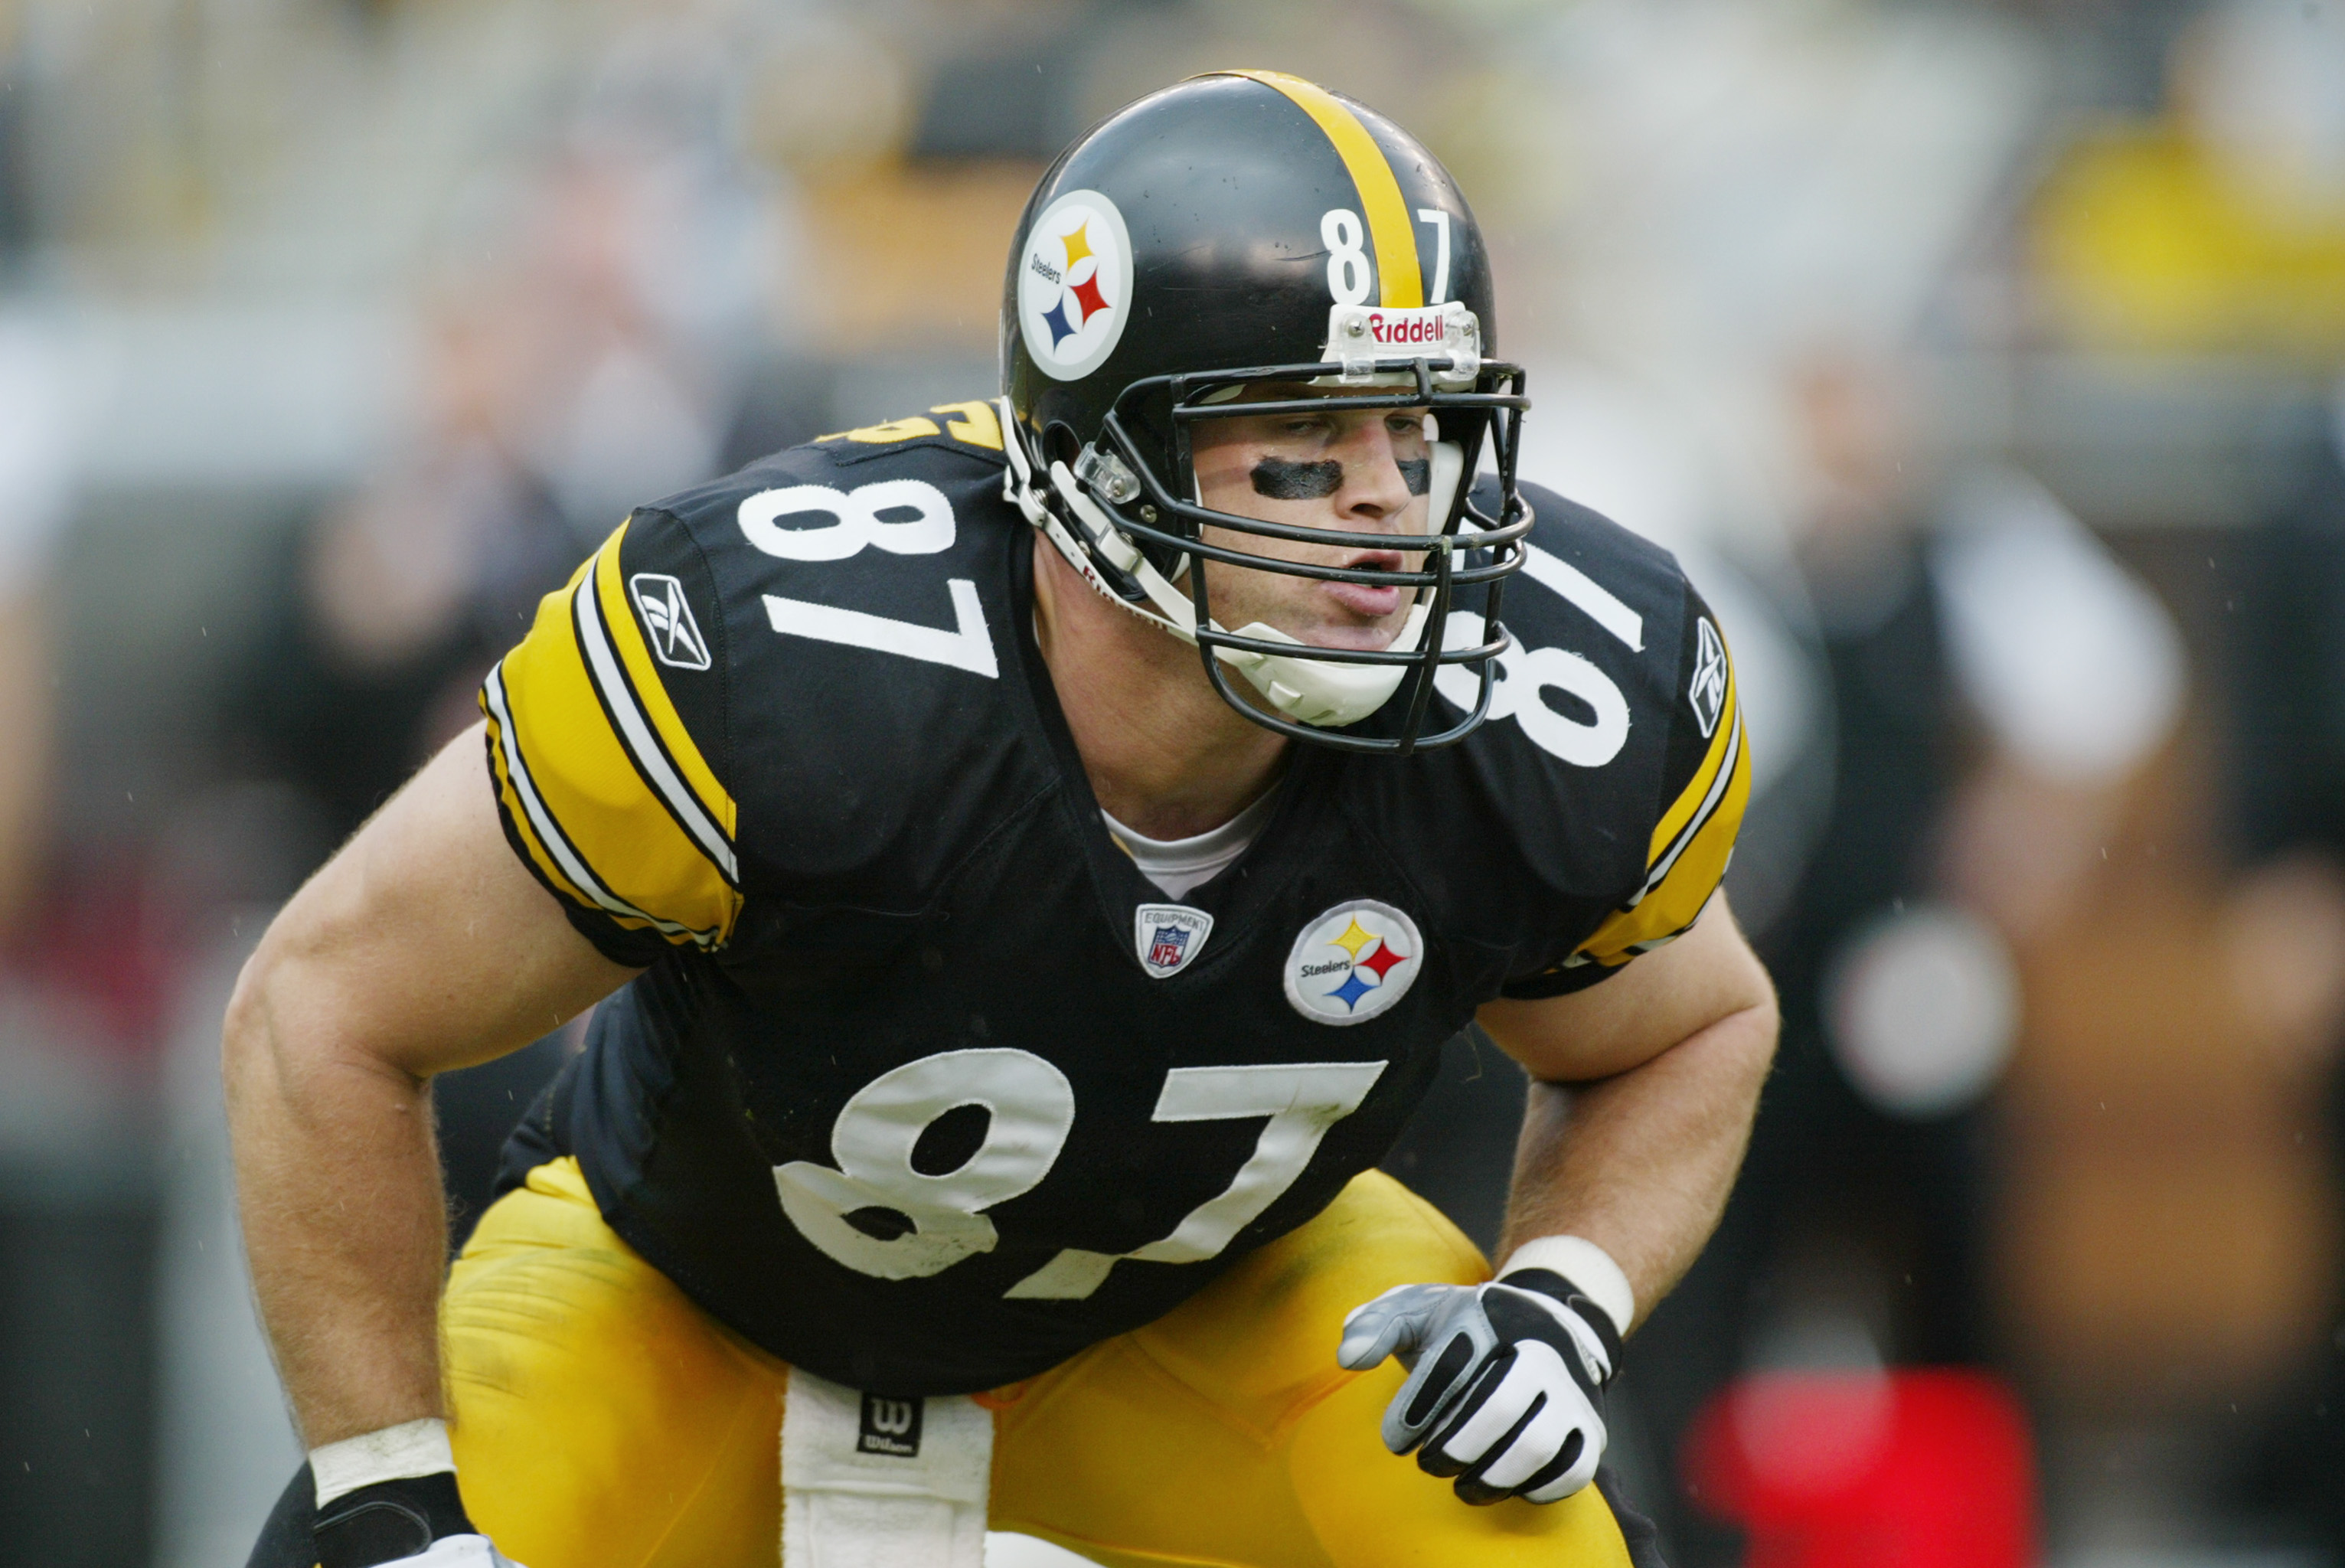 PITTSBURGH, PA - NOVEMBER 10:  Tight end Mark Bruener #87 of the Pittsburgh Steelers during a game against the Atlanta Falcons on November 10, 2002 at Heinz Field in Pittsburgh, Pennsylvania. The game ended in a 34-34 tie. (Photo by Rick Stewart/Getty Ima